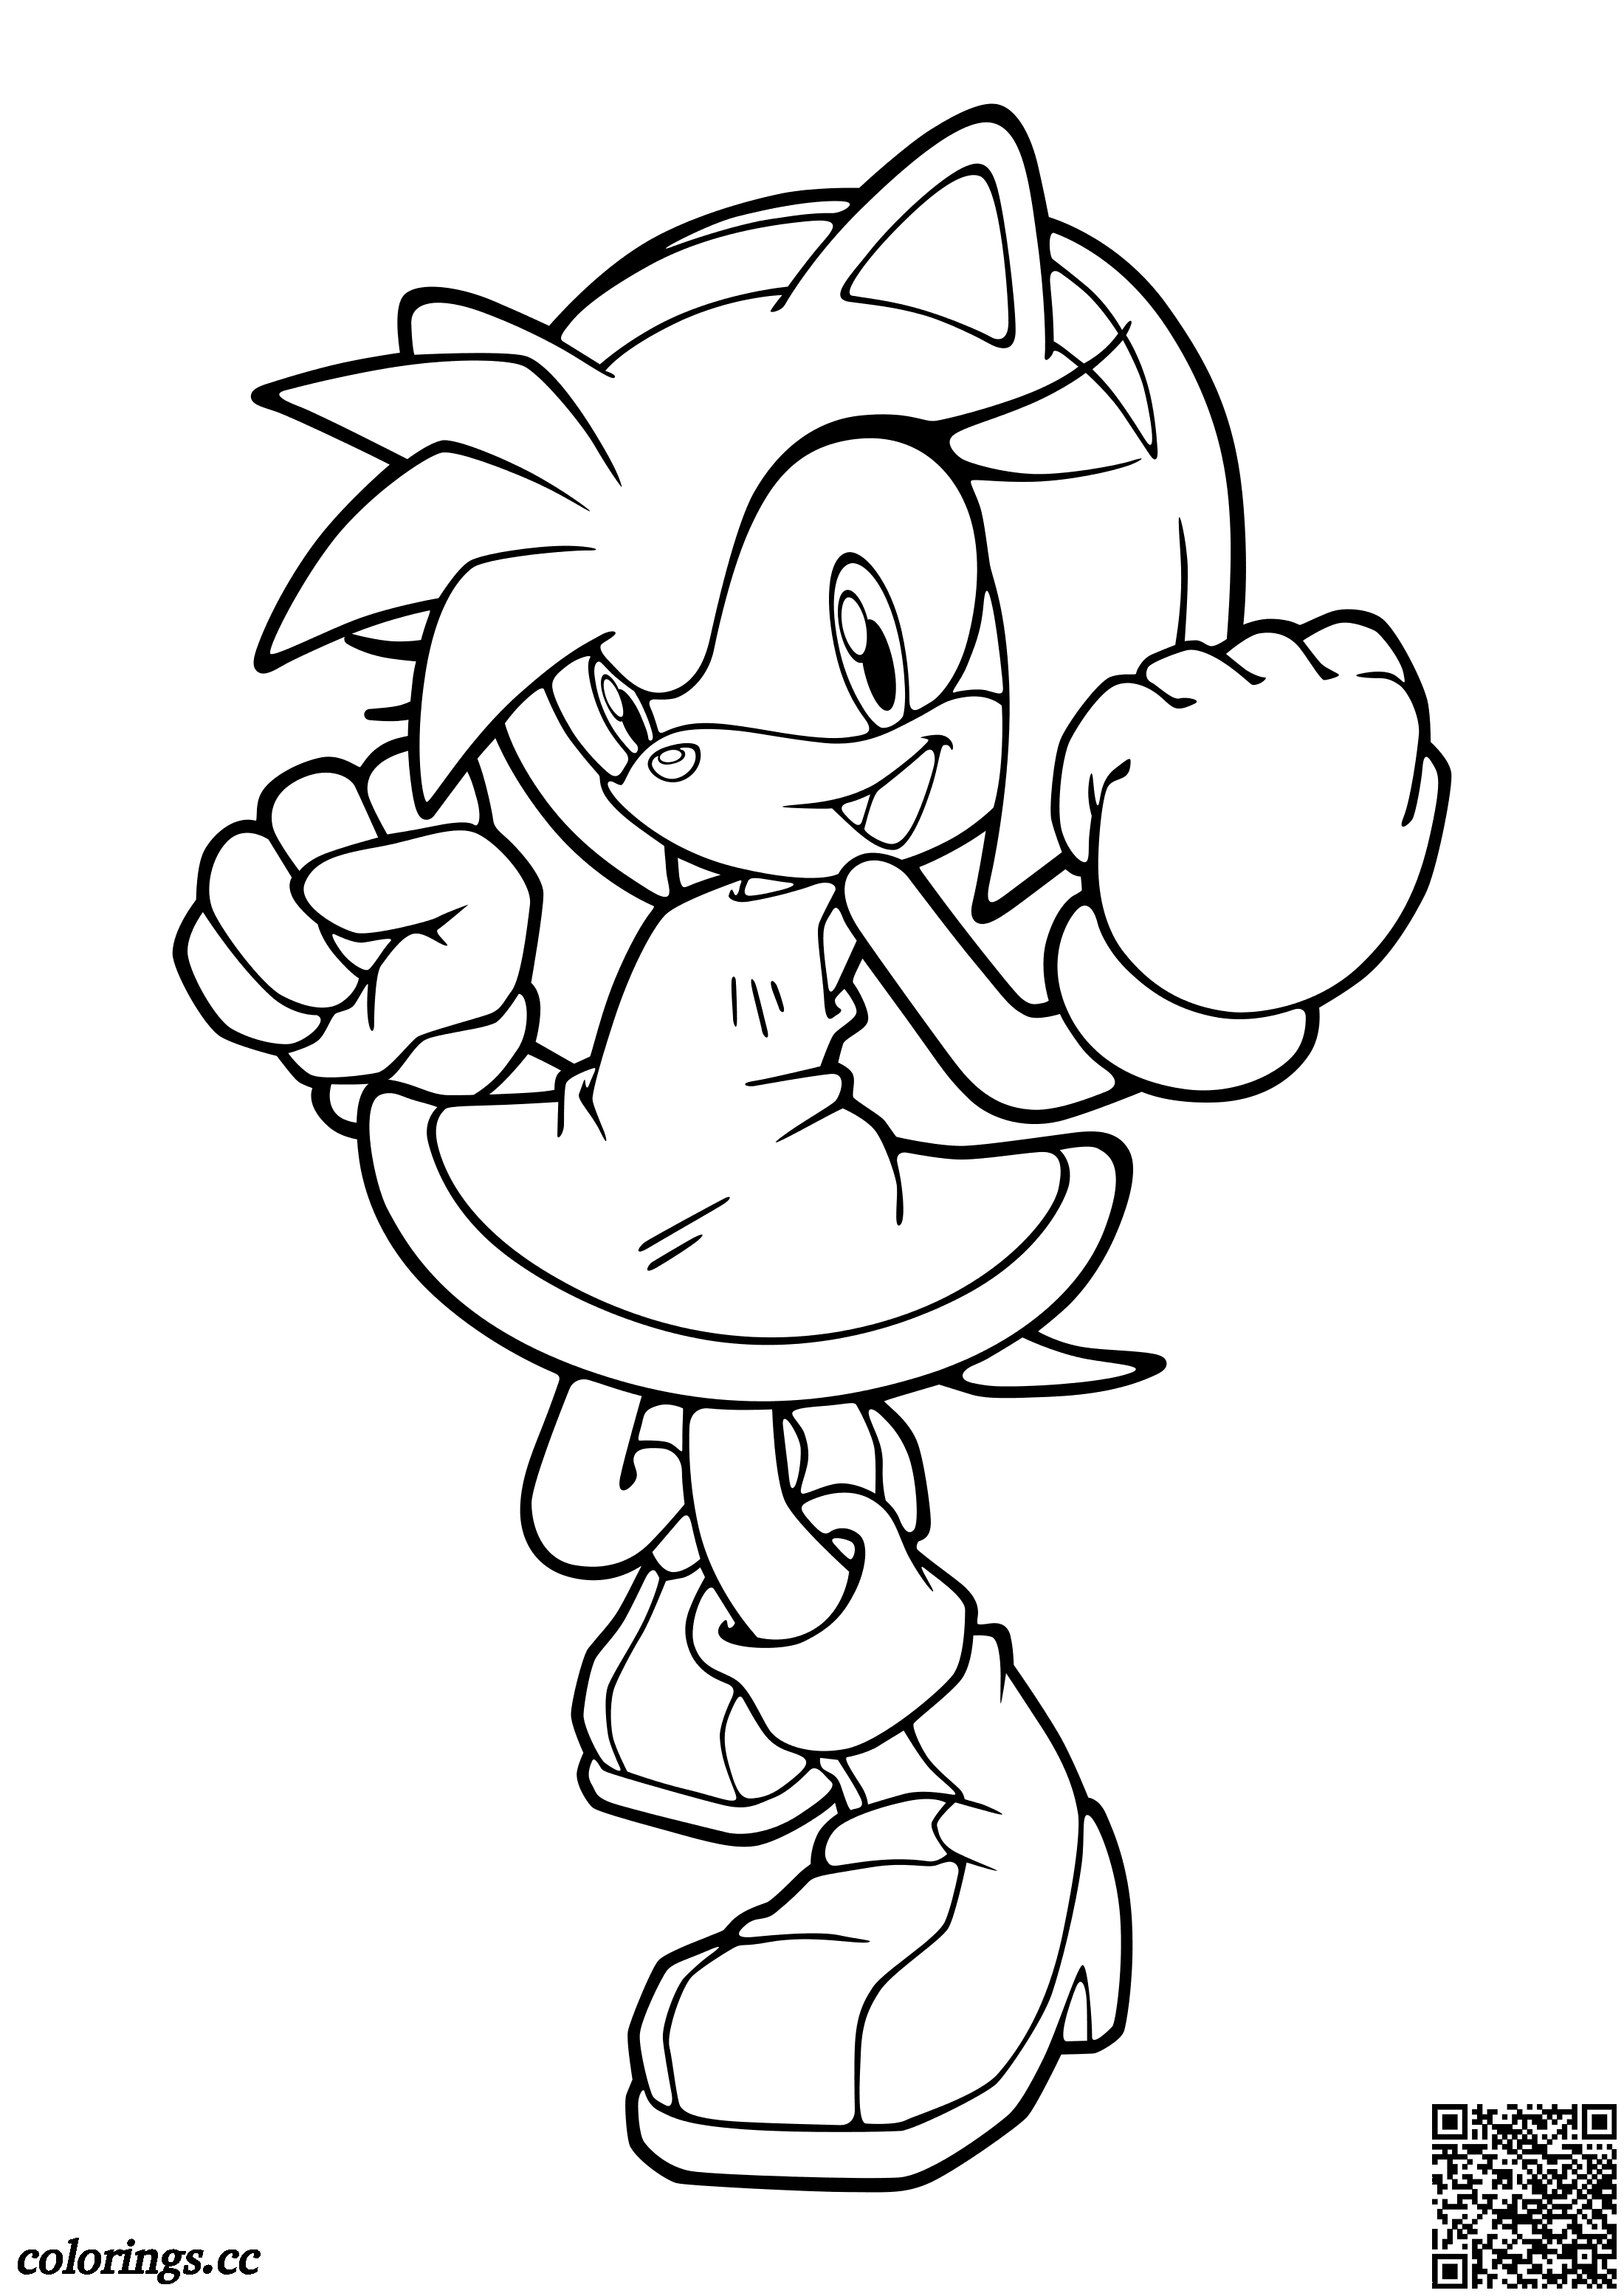 Energetic Amy Rose coloring pages, Sonic the Hedgehog coloring ...